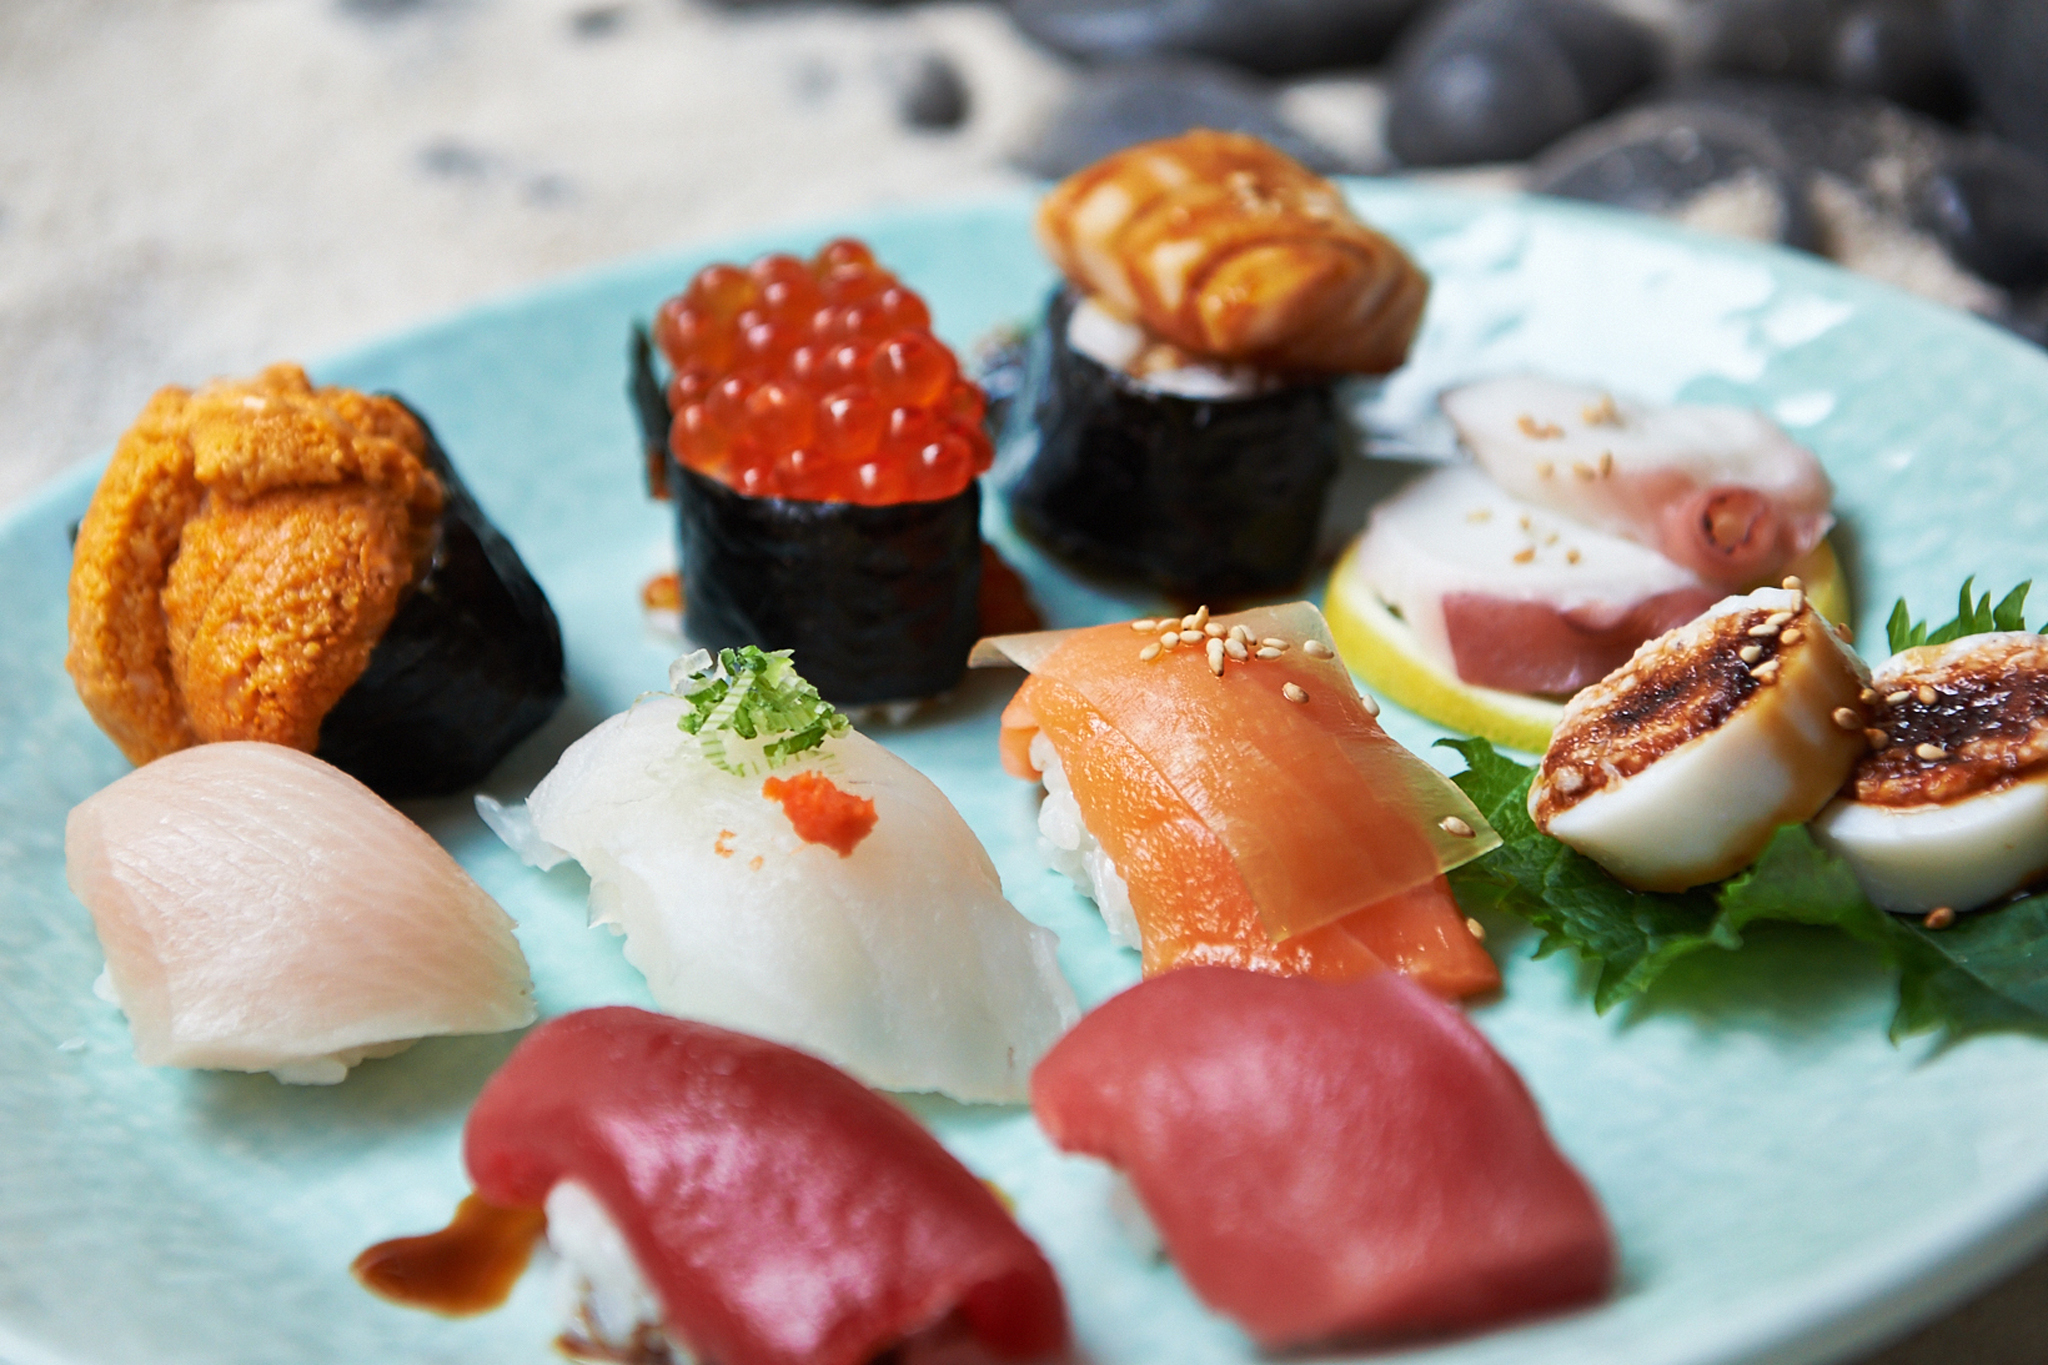 “New York City’s Finest: The Top Sushi Spots”